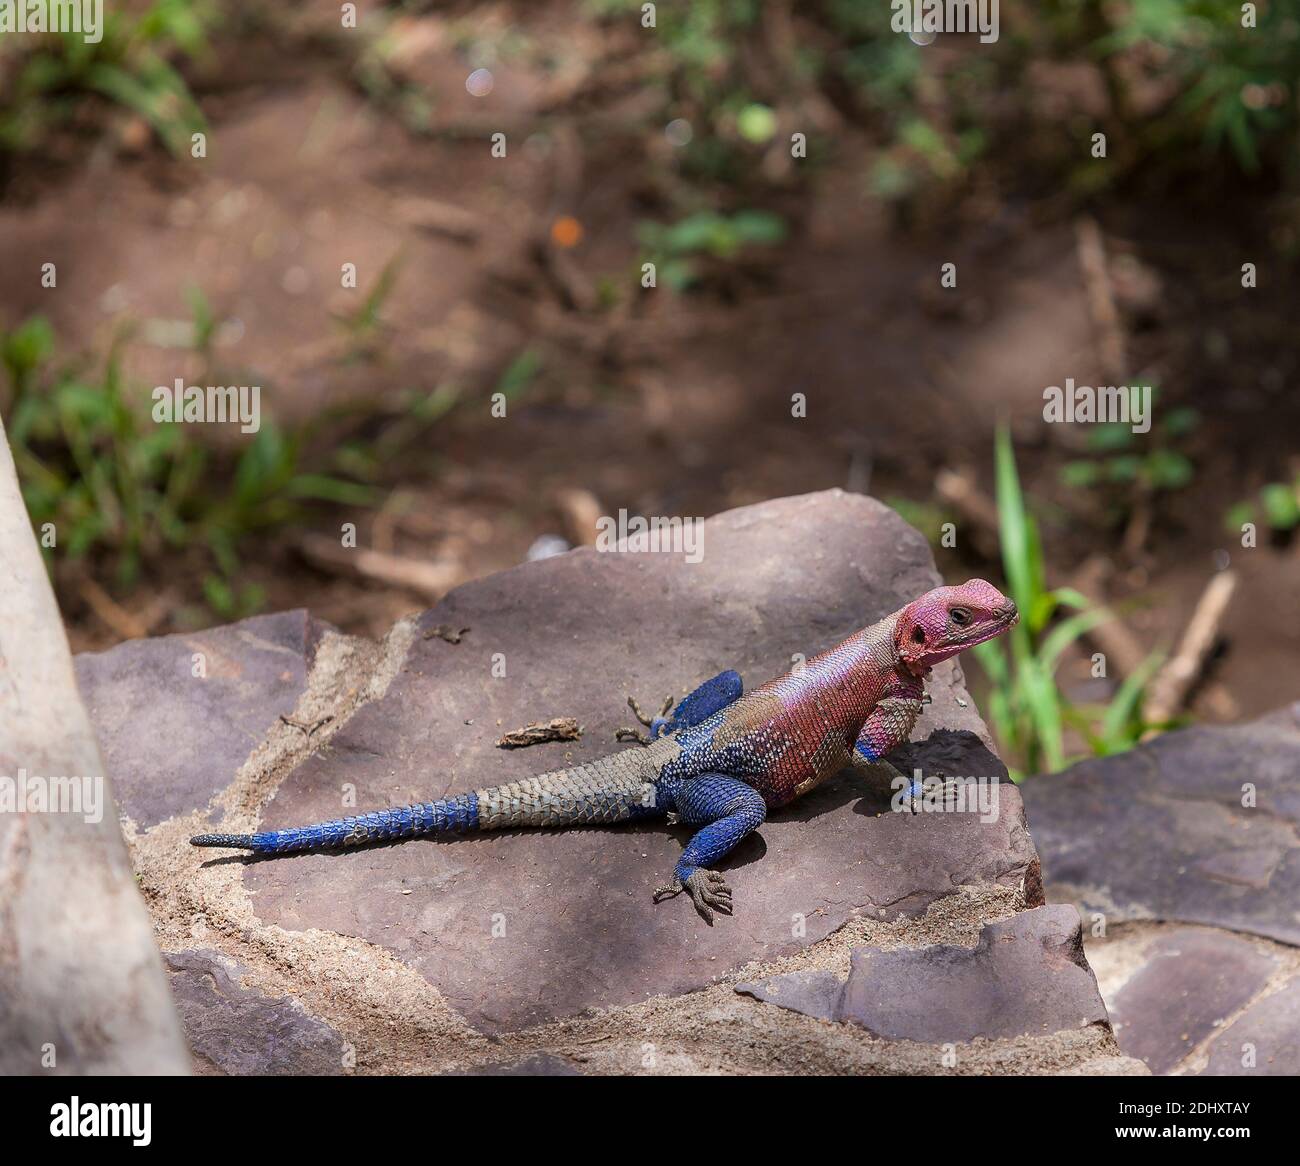 Pink Headed Lizard sitting on the staircase of a Lodge in the Serengeti National Park, Tanzania, Africa Stock Photo